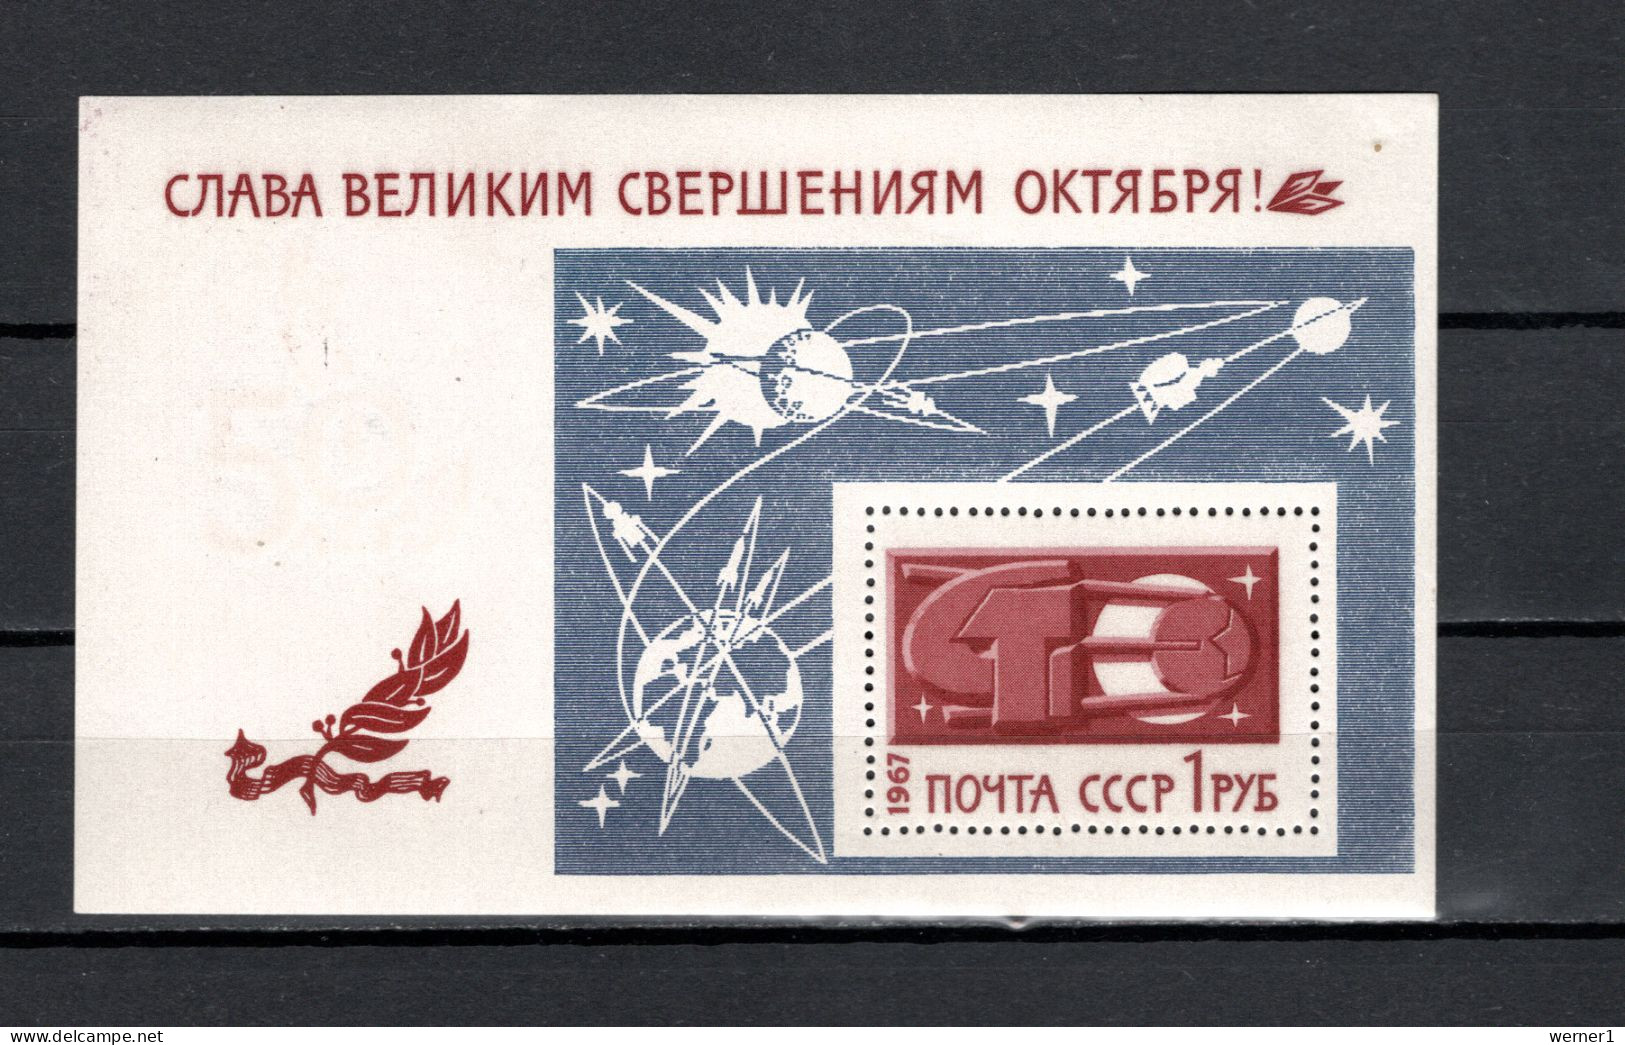 USSR Russia 1967 Space, October Revolution 50th Anniversary S/s MNH - Russia & USSR